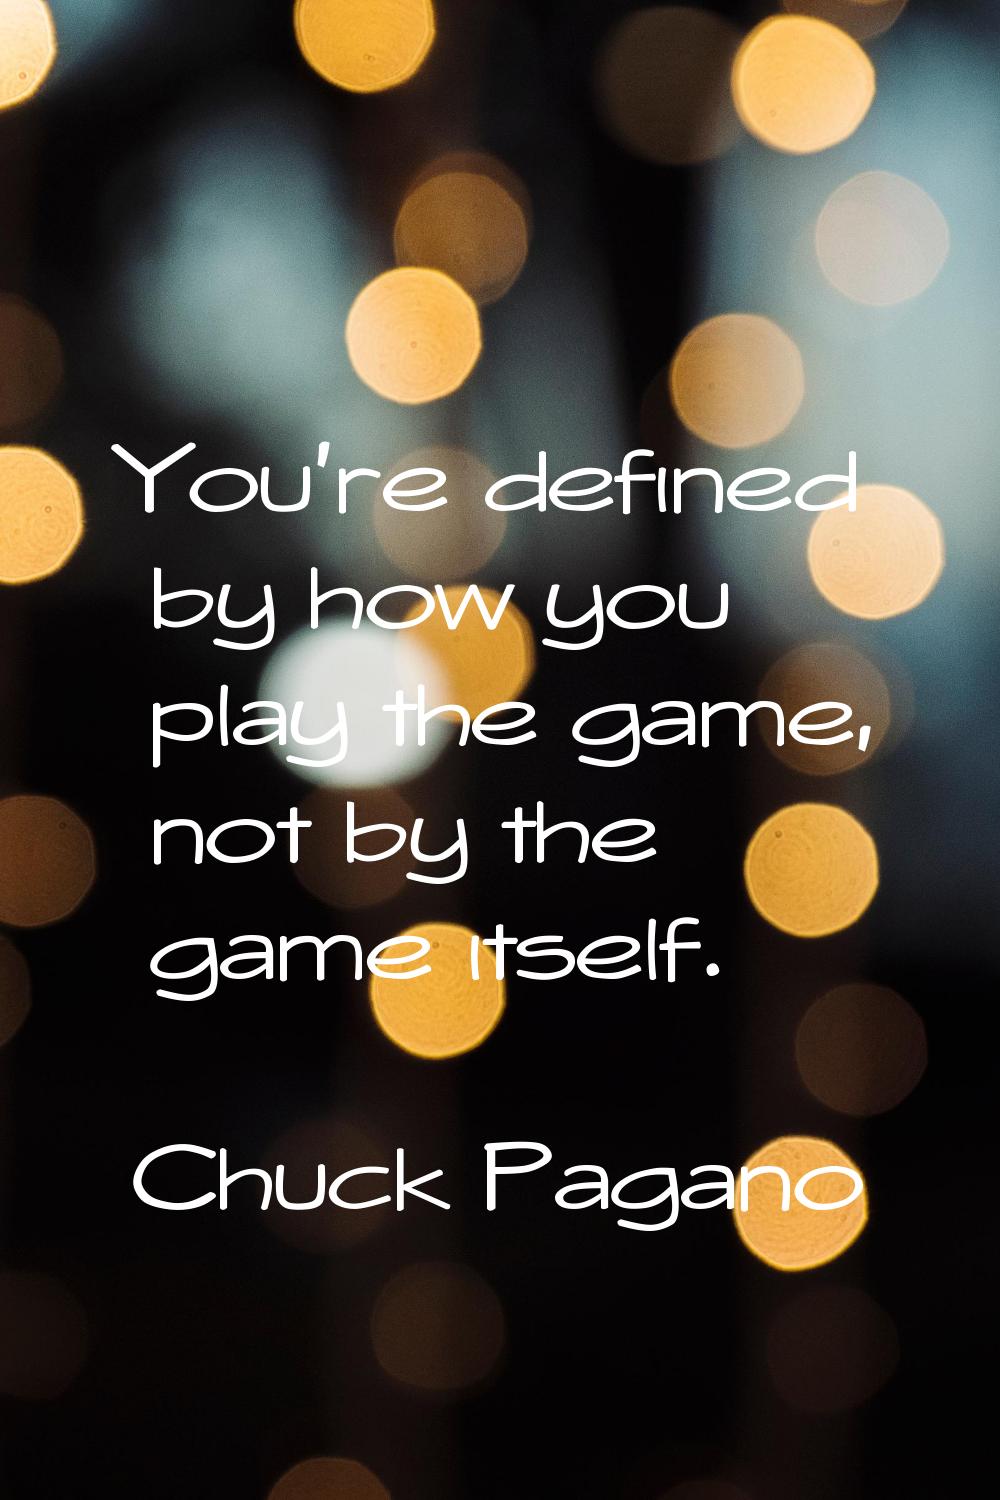 You're defined by how you play the game, not by the game itself.